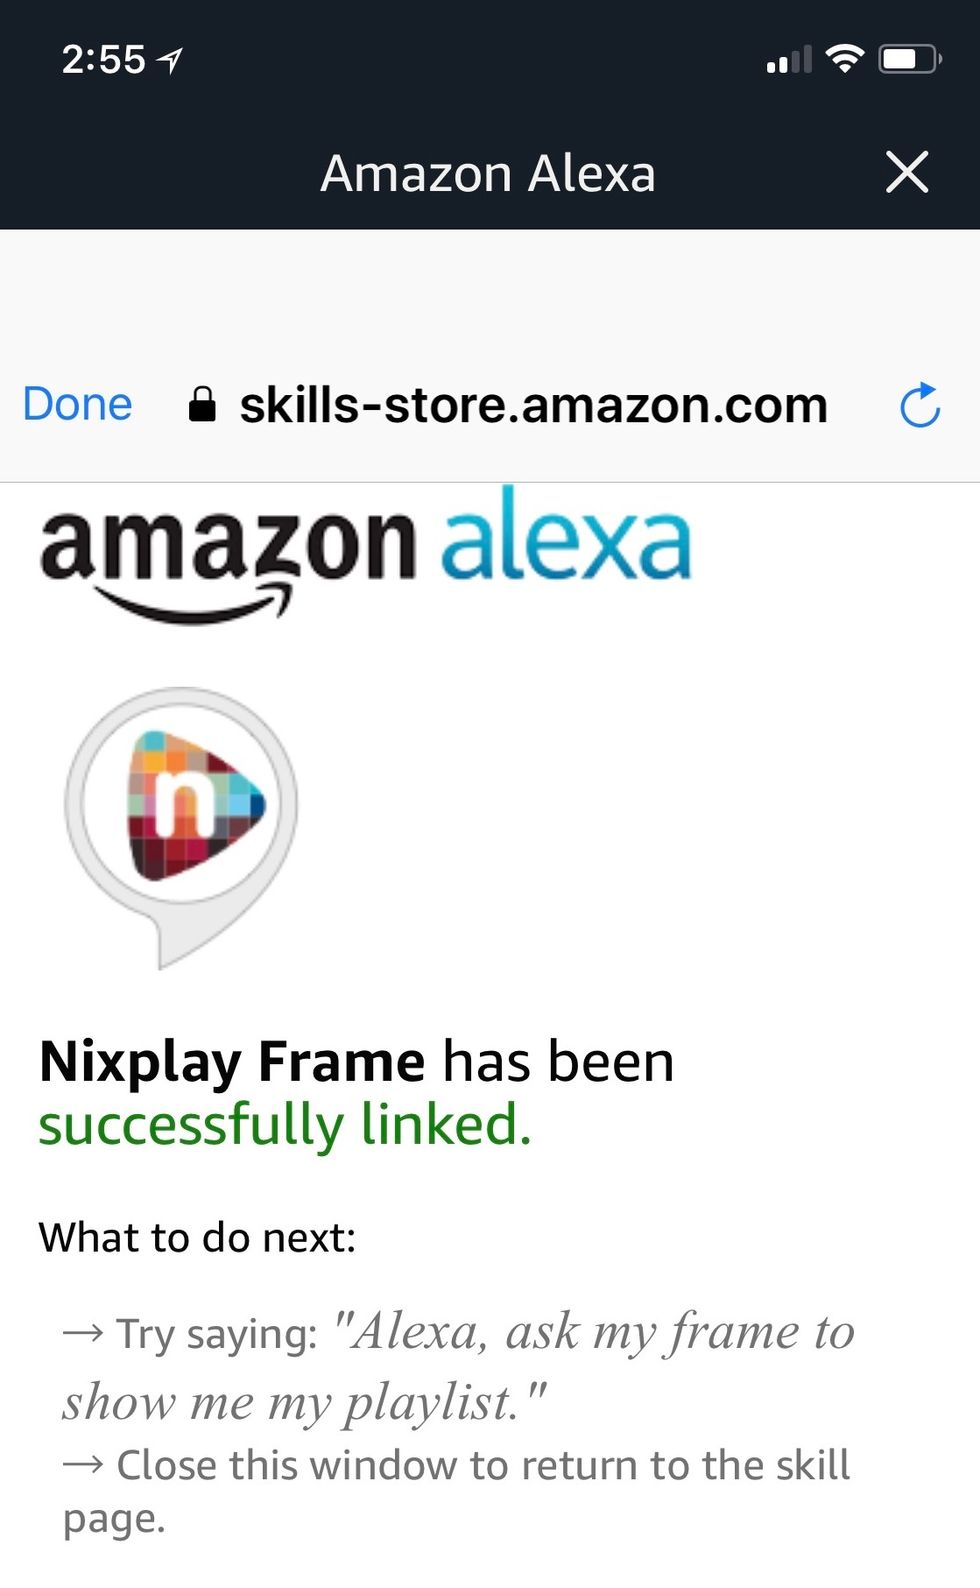 Picture of Alexa skill page in Alexa app for Nixplay Seed.